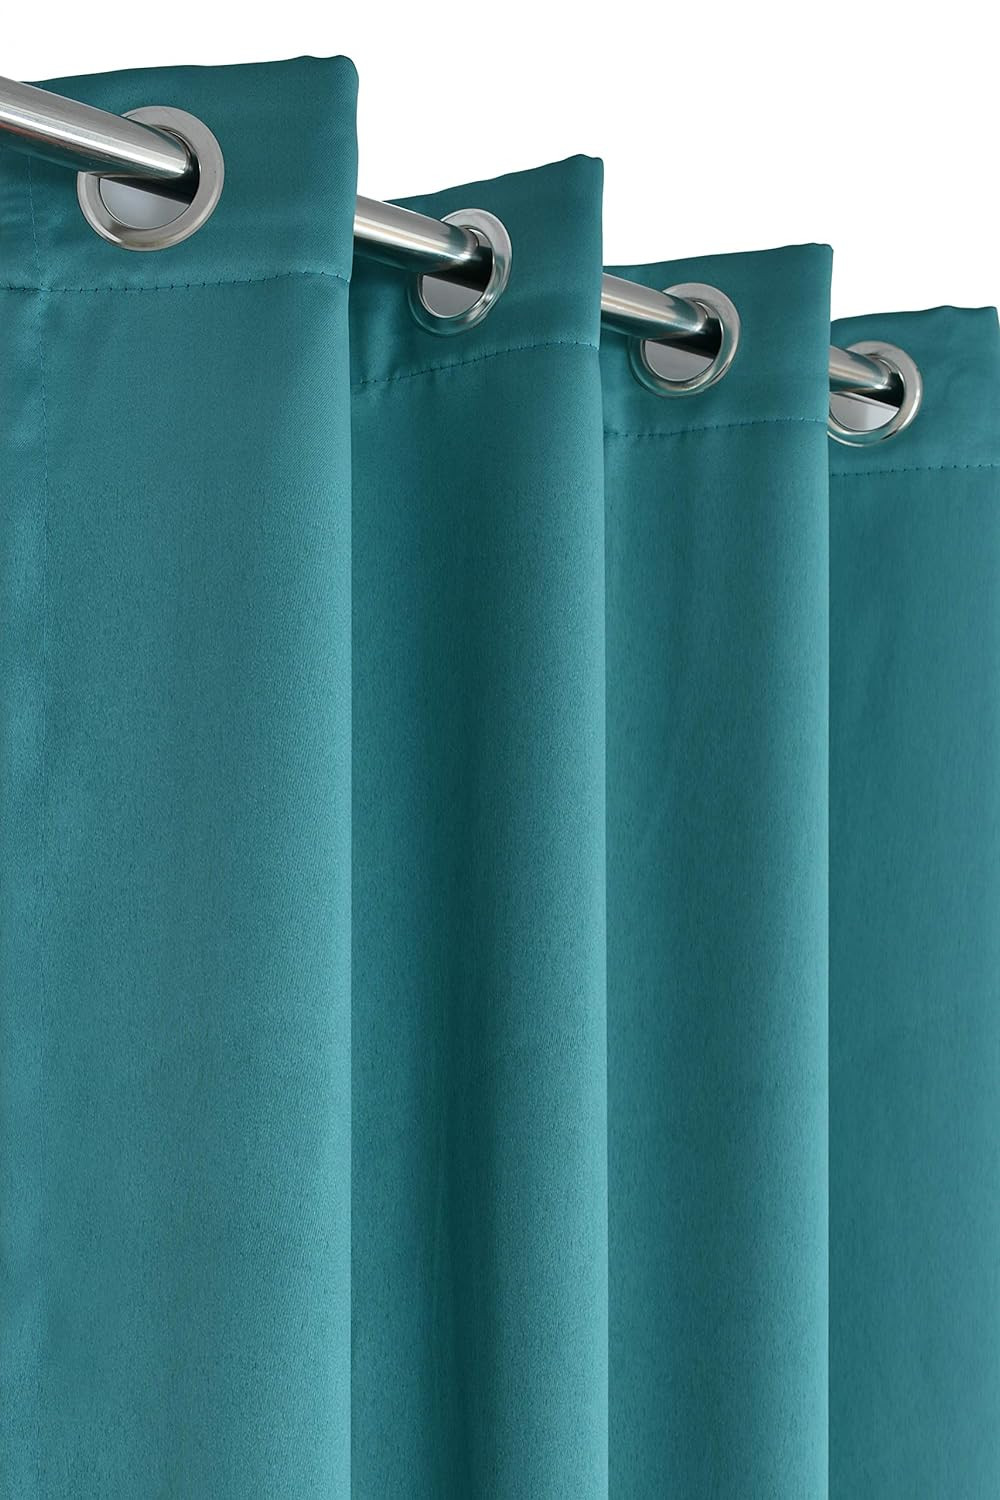 Kuber Industries 100% Room Darkening Black Out Curtain I 7 Feet Door Curtain I Insulated Heavy Polyester Solid Curtain|Drapes with 8 Eyelet for Home & Office (Aqua)